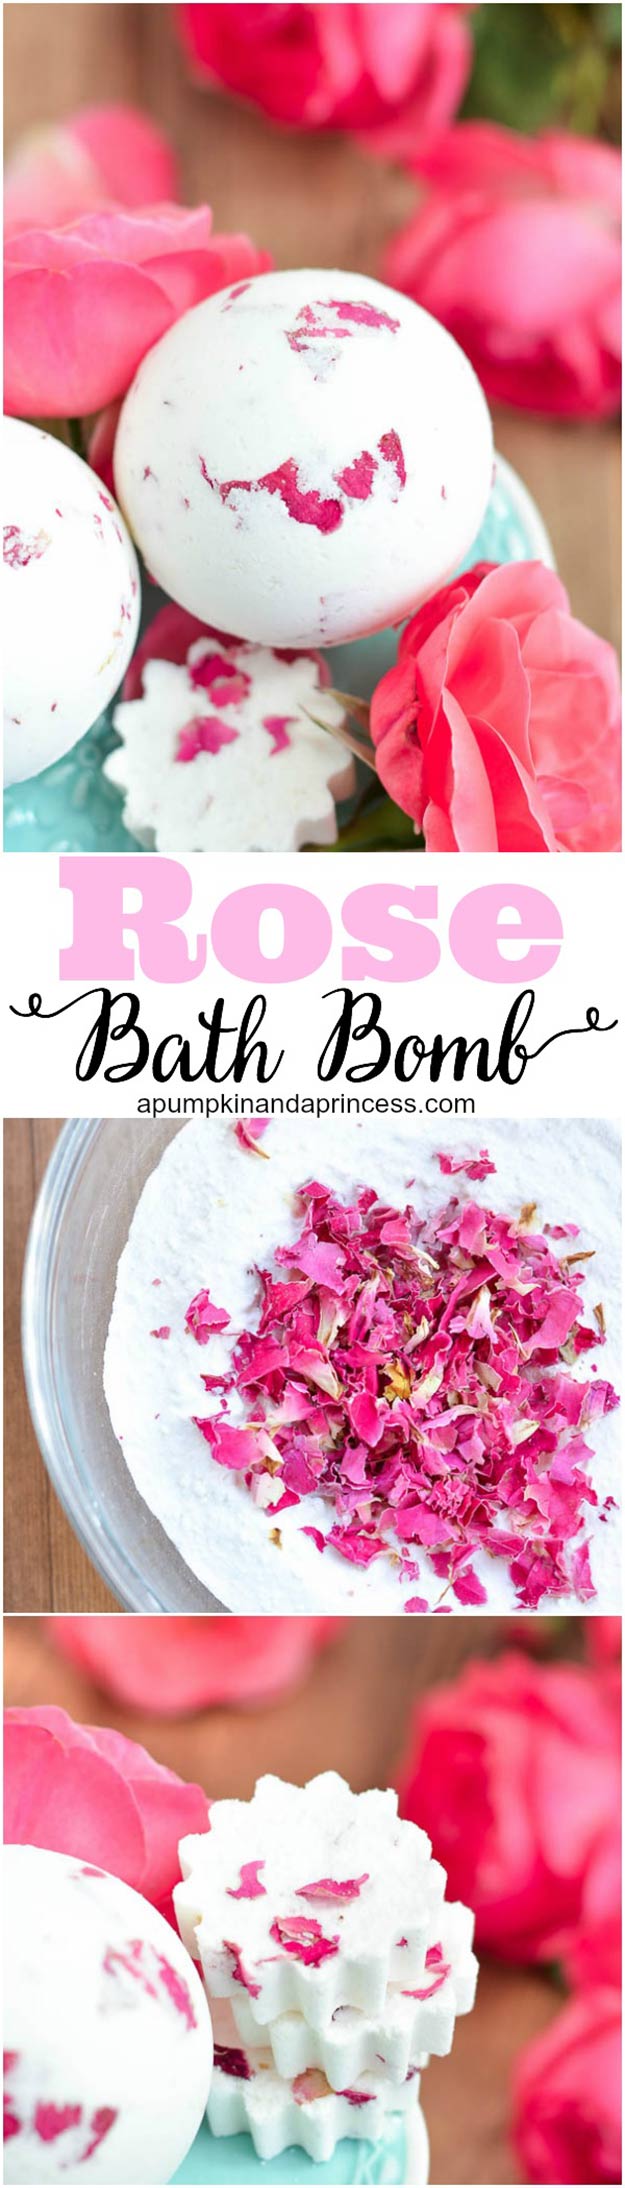 Homemade DIY Bath Bombs | Rose Bath Bombs Tutorial Like Lush | Pretty and Cheap DIY Gifts | DIY Projects and Crafts by DIY JOY